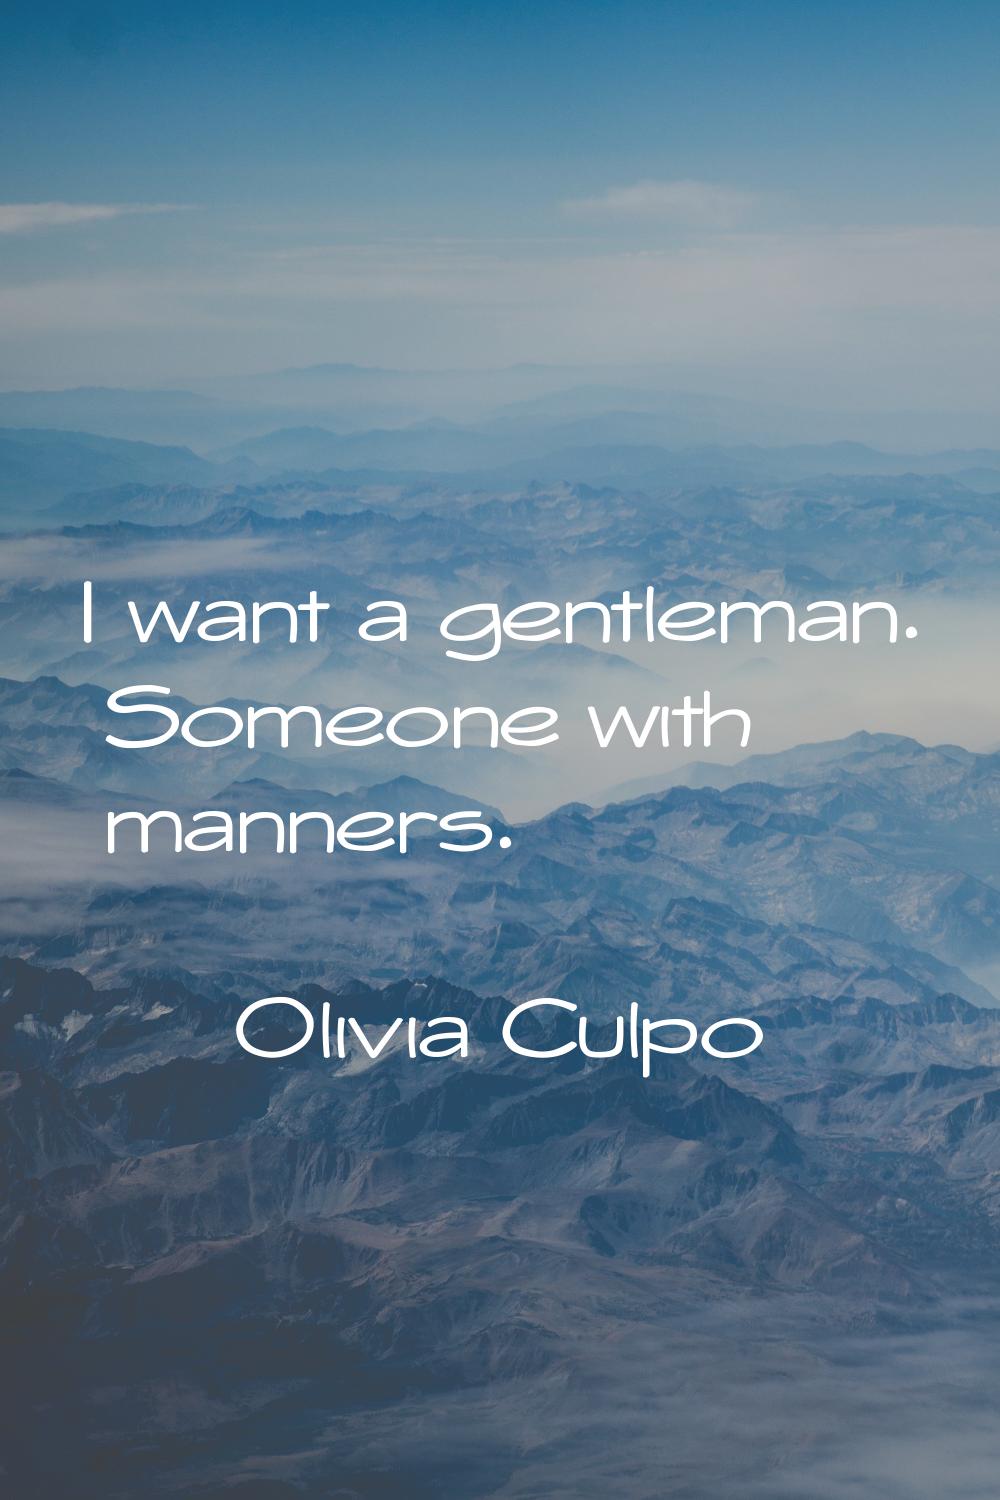 I want a gentleman. Someone with manners.